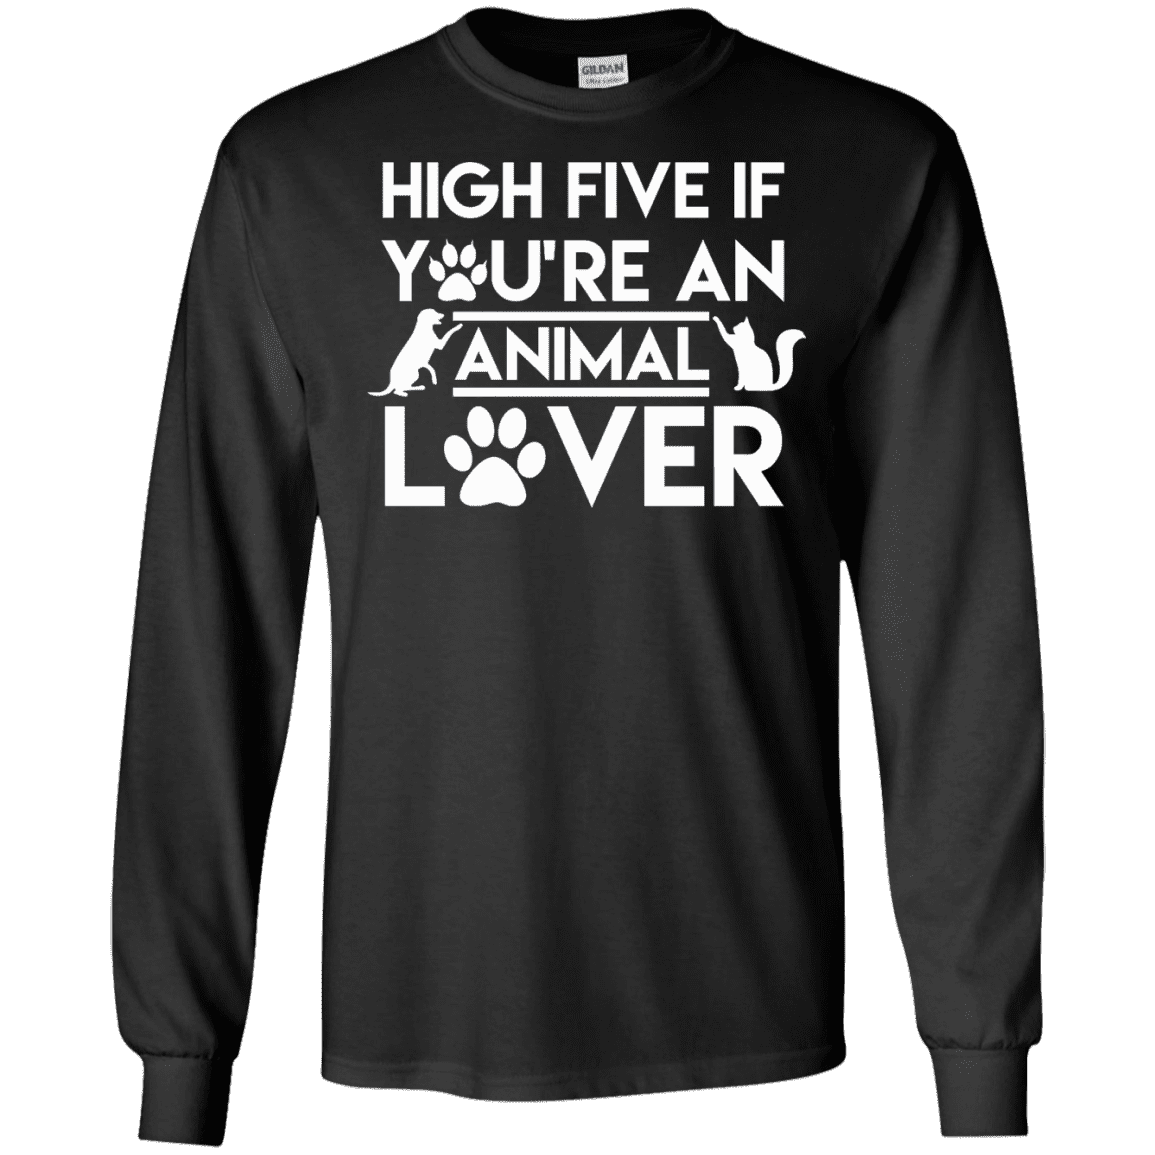 High Five If You're An Animal Lover - Long Sleeve T Shirt.